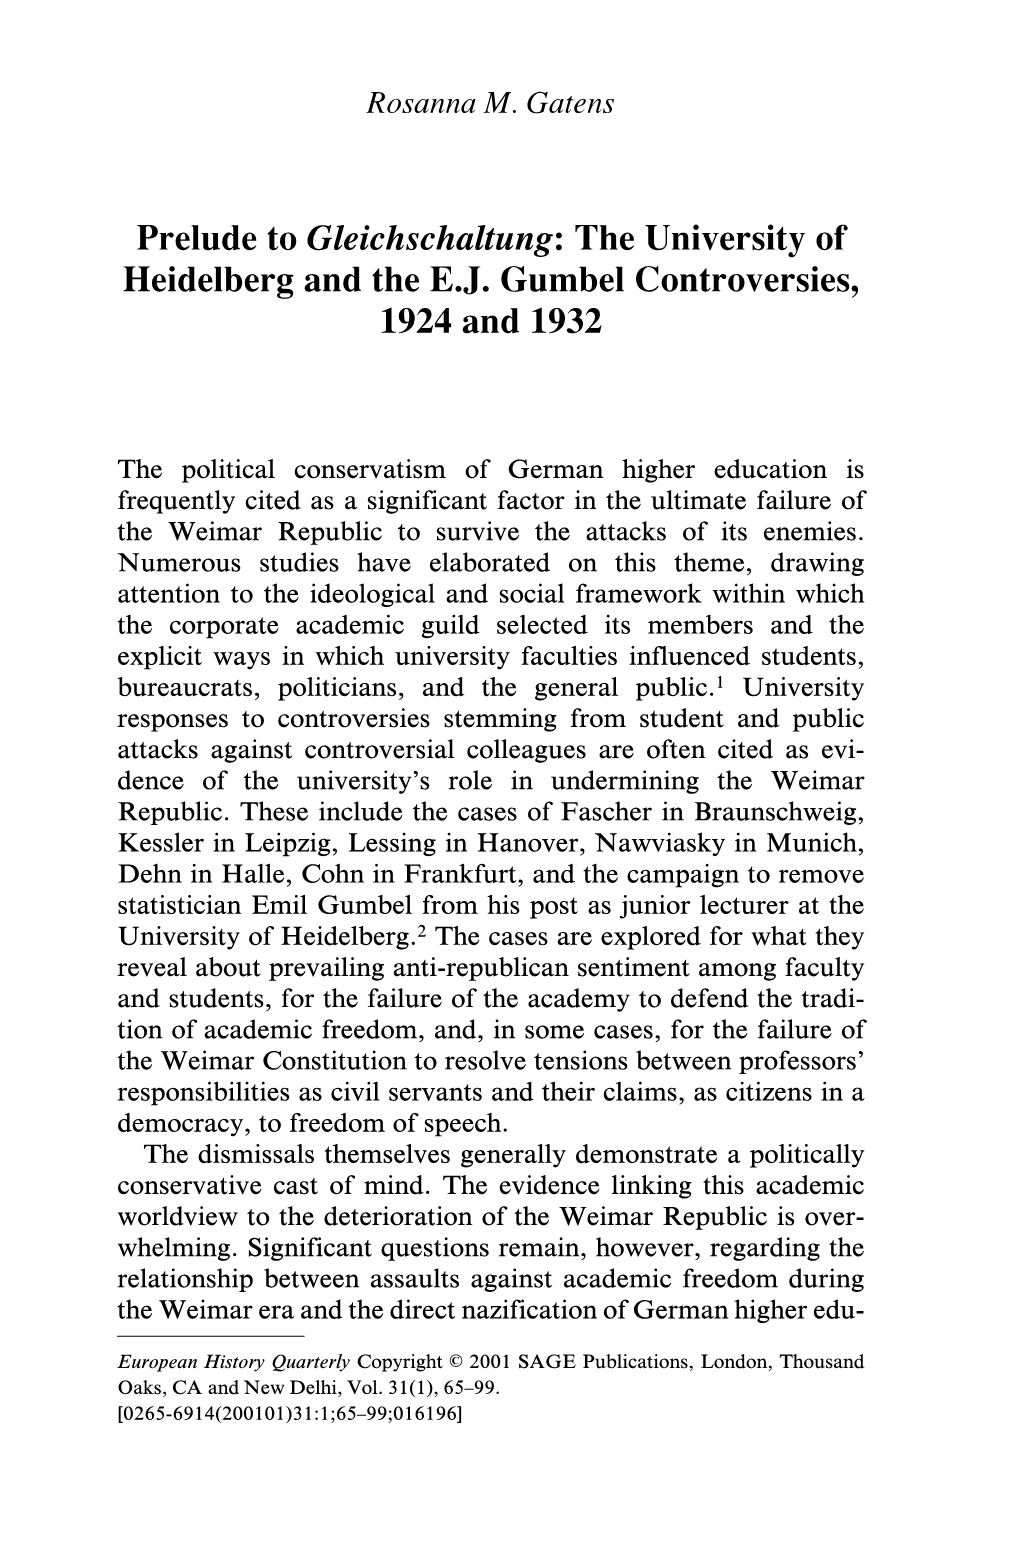 The University of Heidelberg and the EJ Gumbel Controversies, 1924